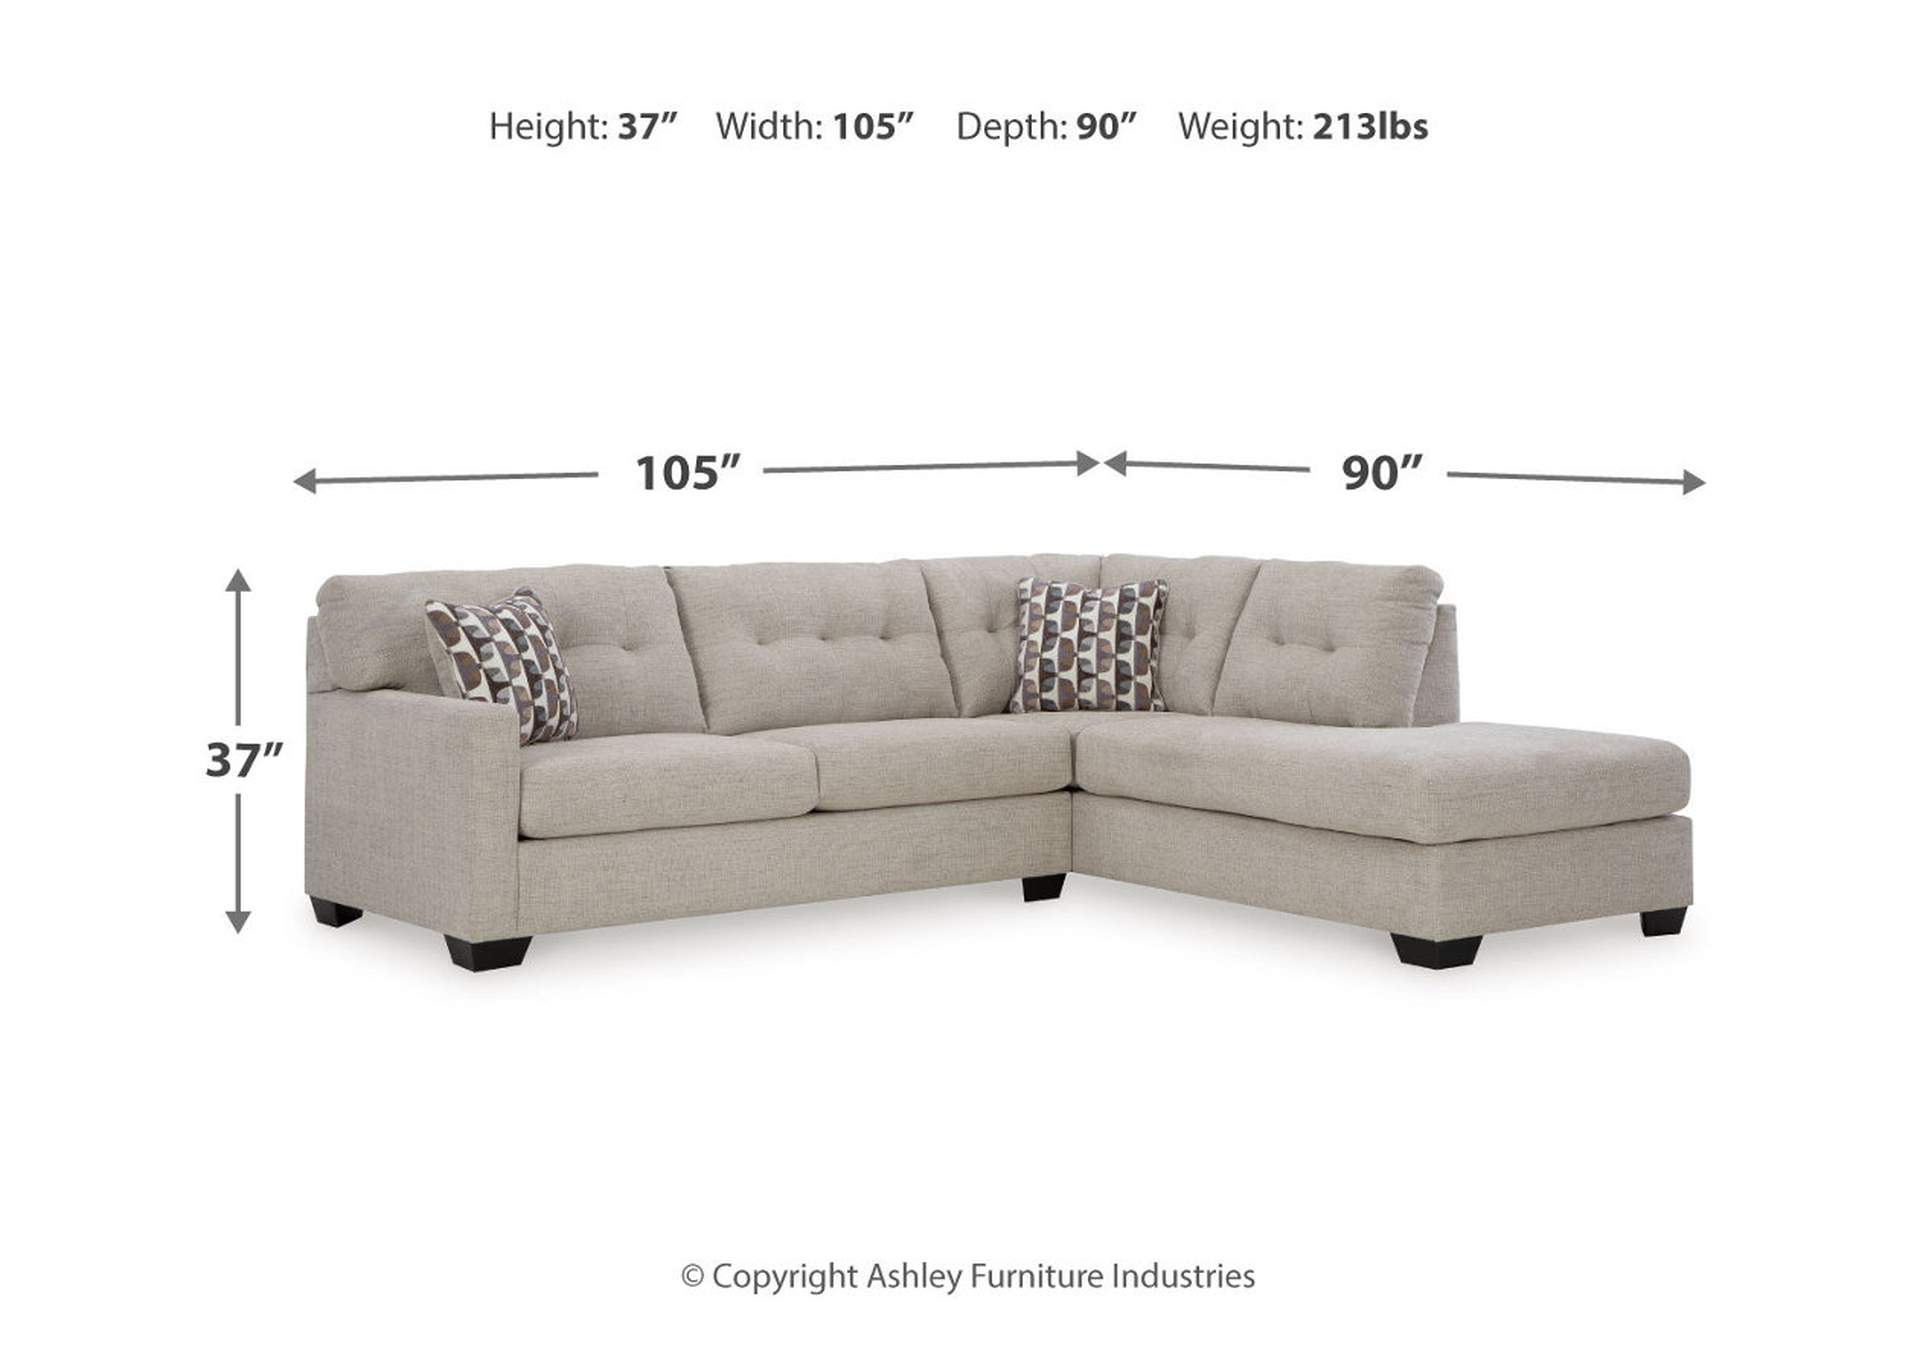 Mahoney 2-Piece Sectional with Ottoman,Signature Design By Ashley